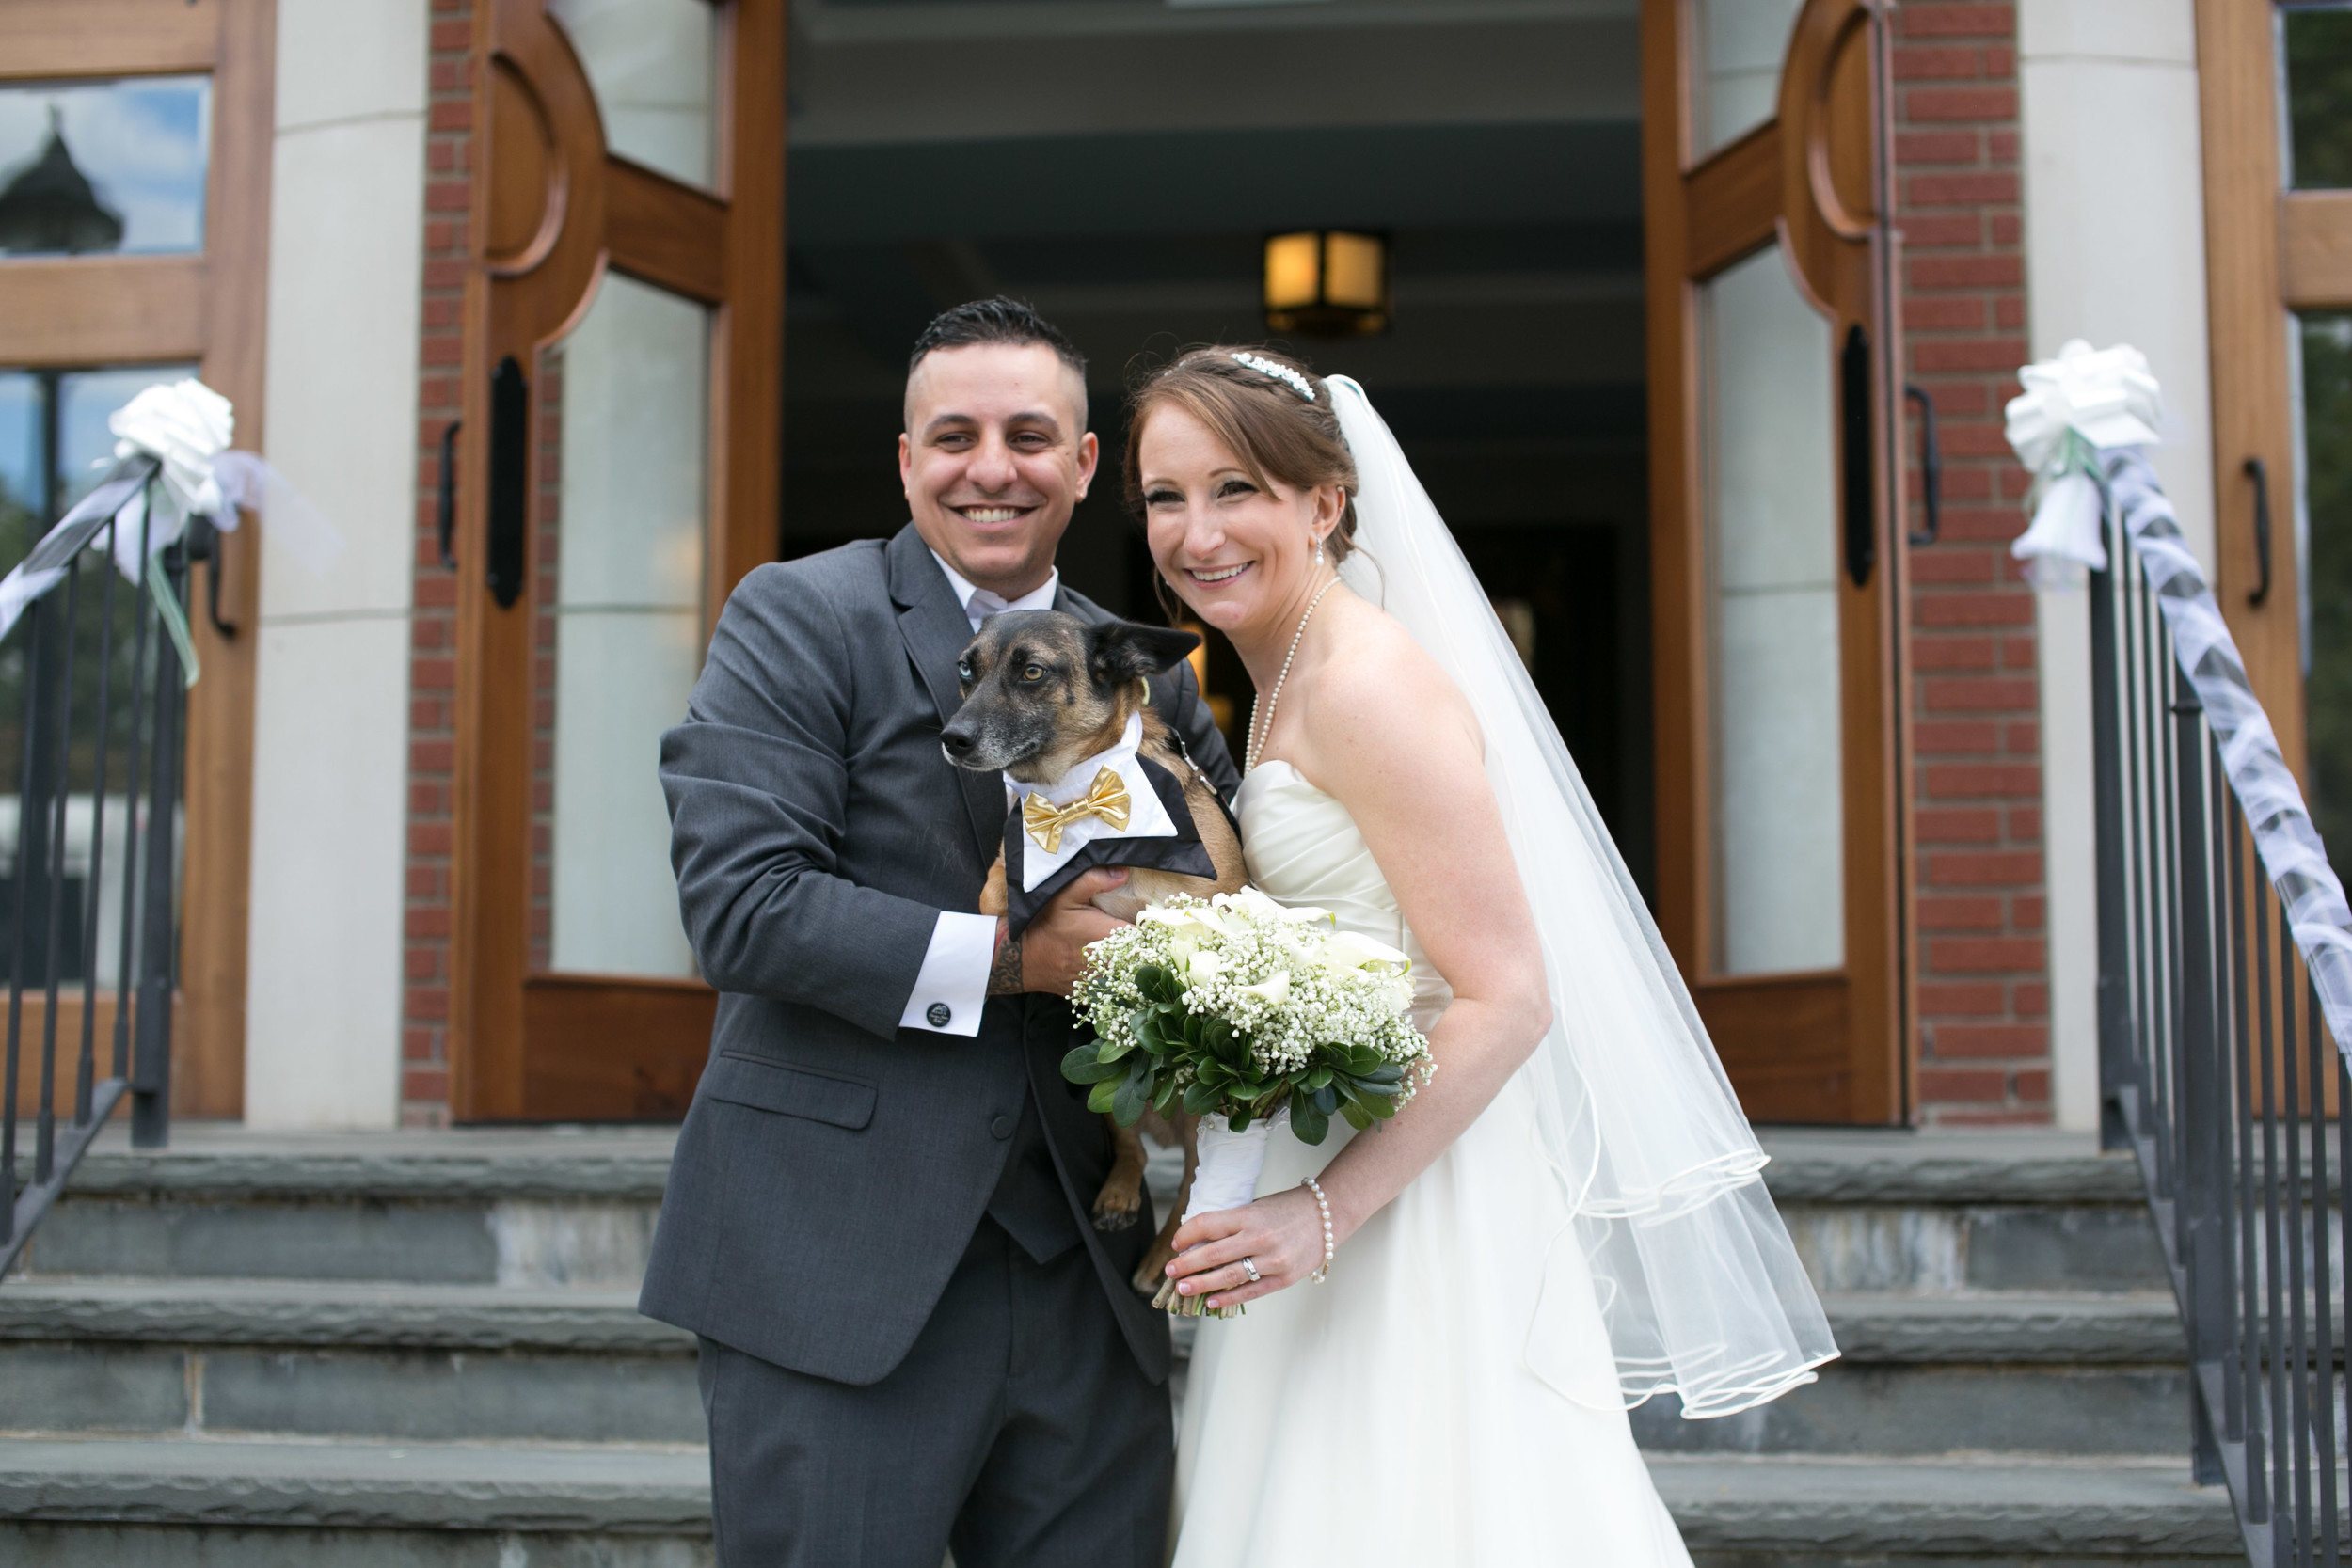 The Silvas on their wedding day with their dog JakeBear. Veronica had the idea to start Pawfect For You after having difficulty managing care for her dog during her own wedding.